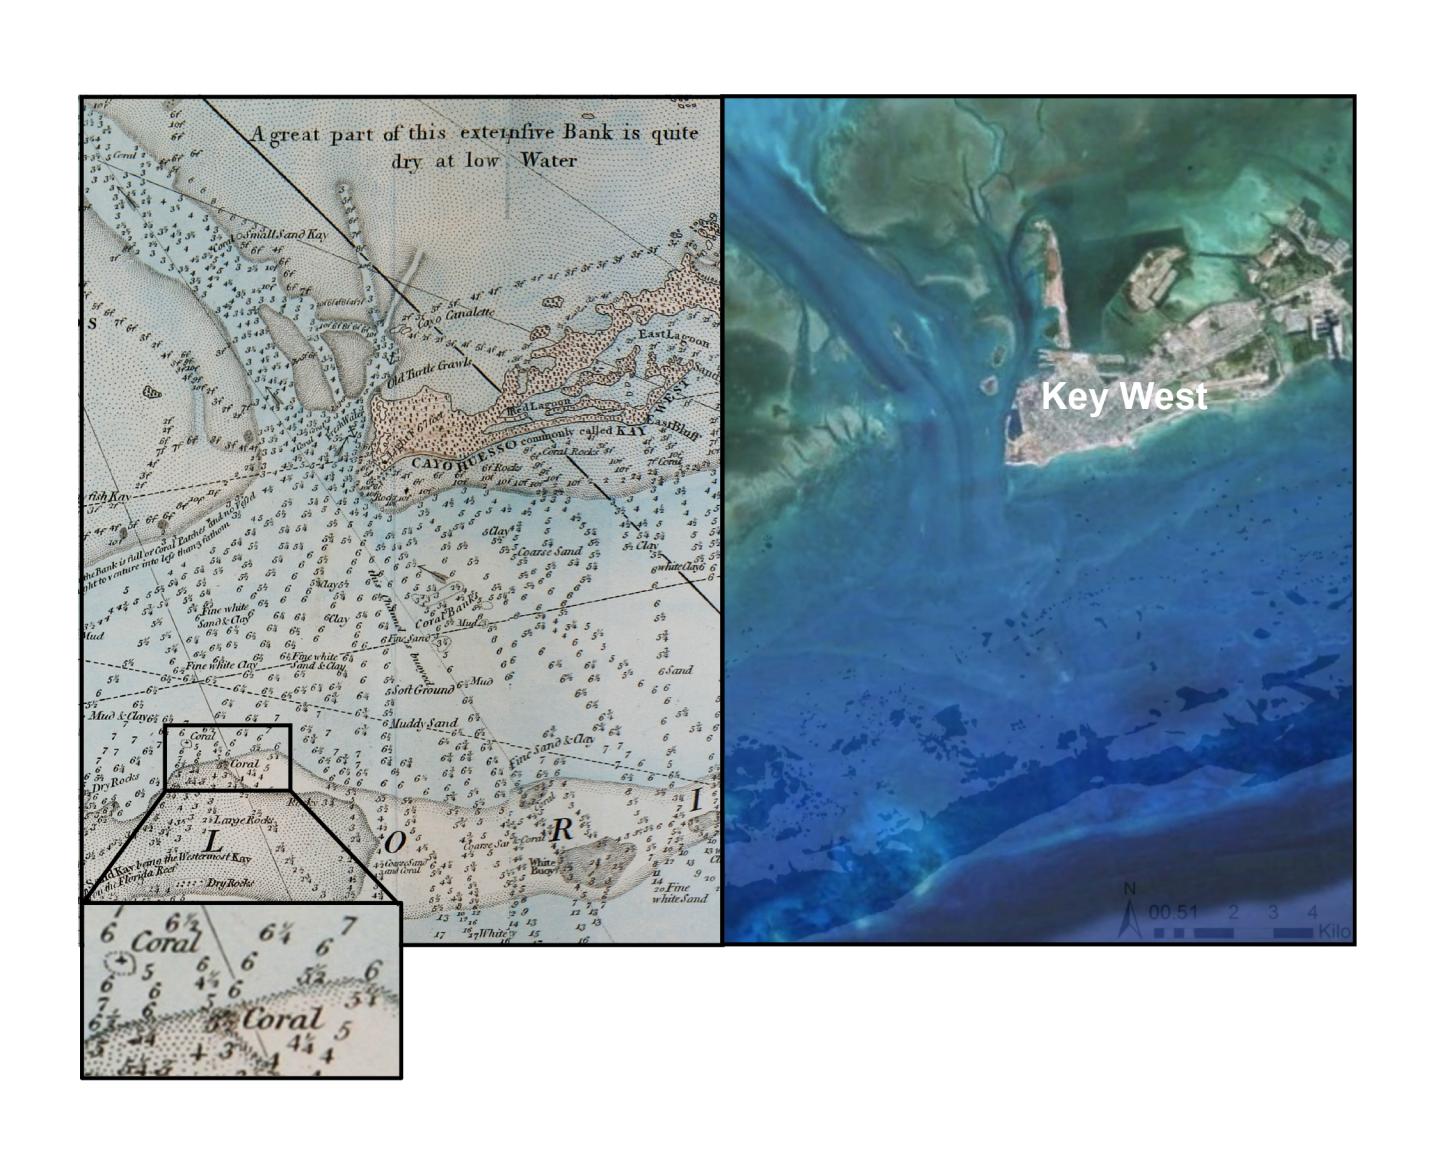 18th Century Nautical Charts Document Historic Loss of Coral Reefs